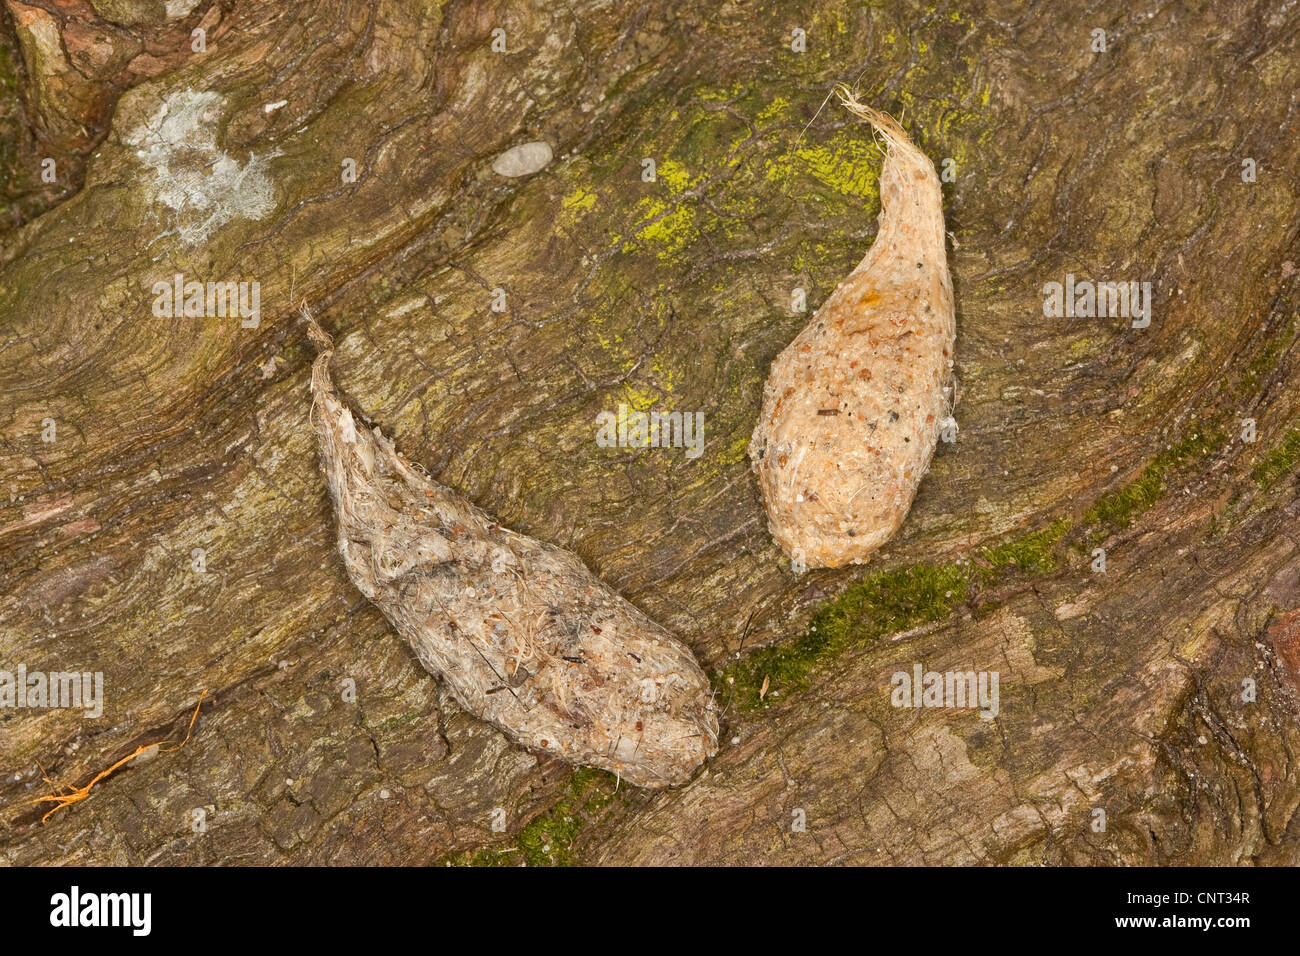 common kestrel (Falco tinnunculus), owl pellets of fur and hairs, Germany Stock Photo